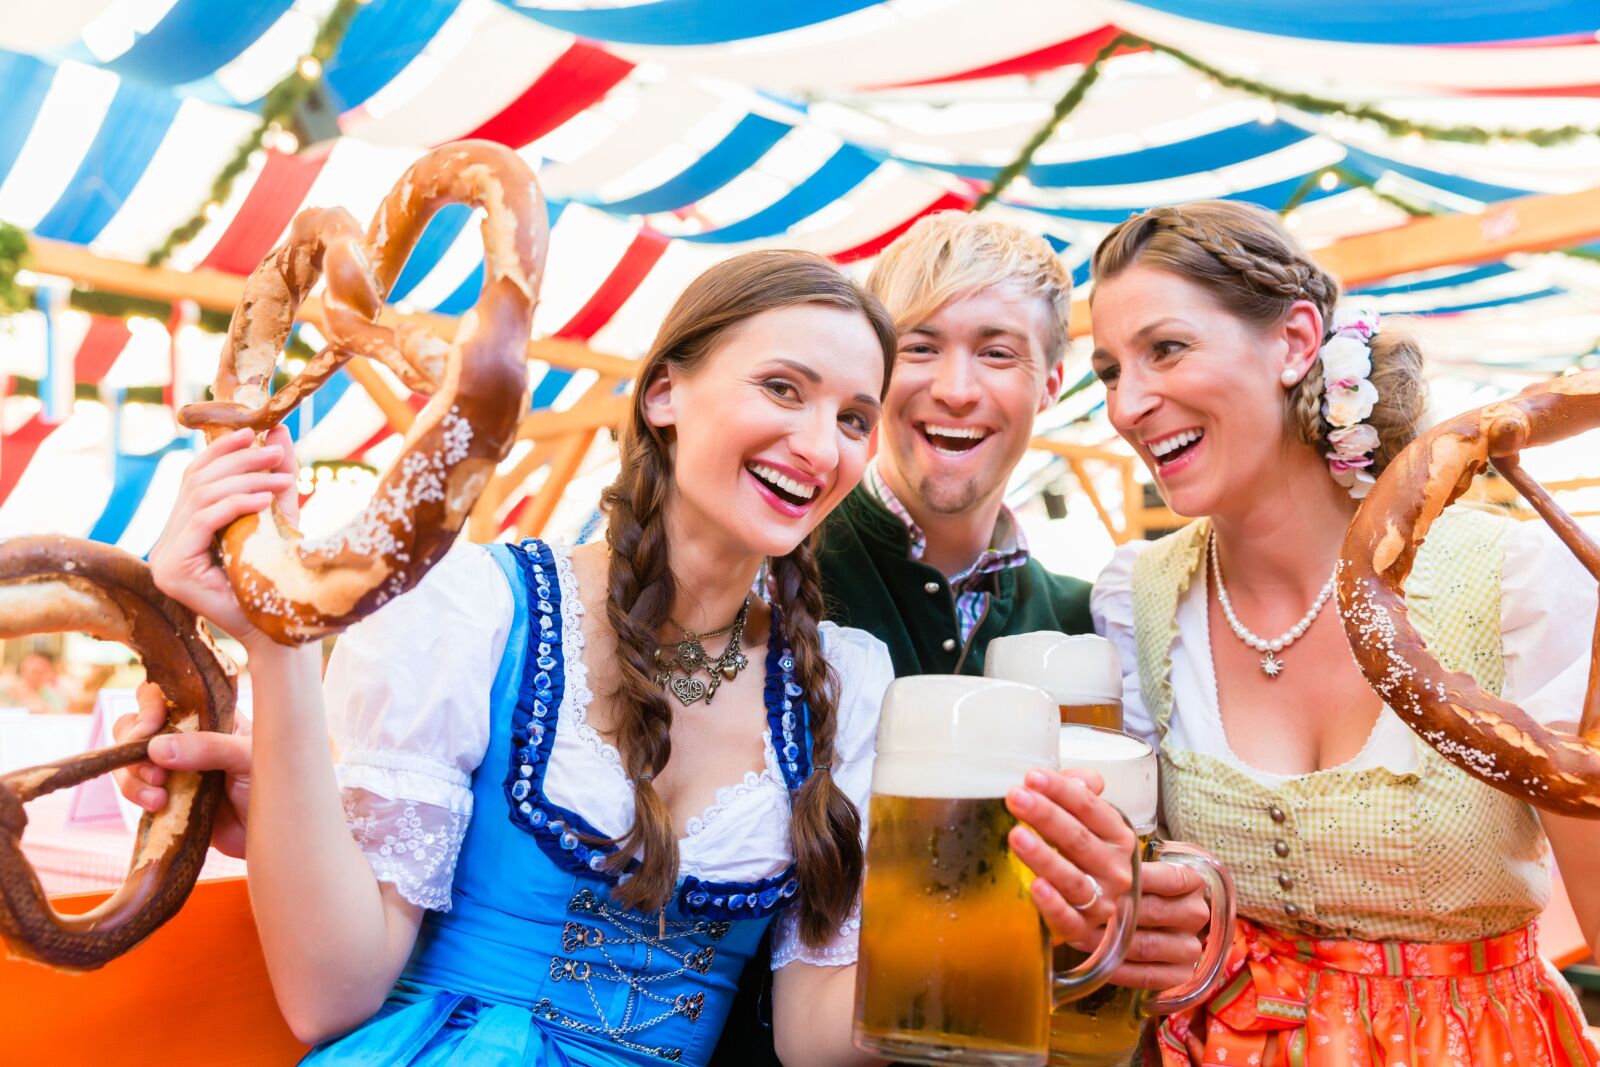 festivals in munich, germany -people with pretzels